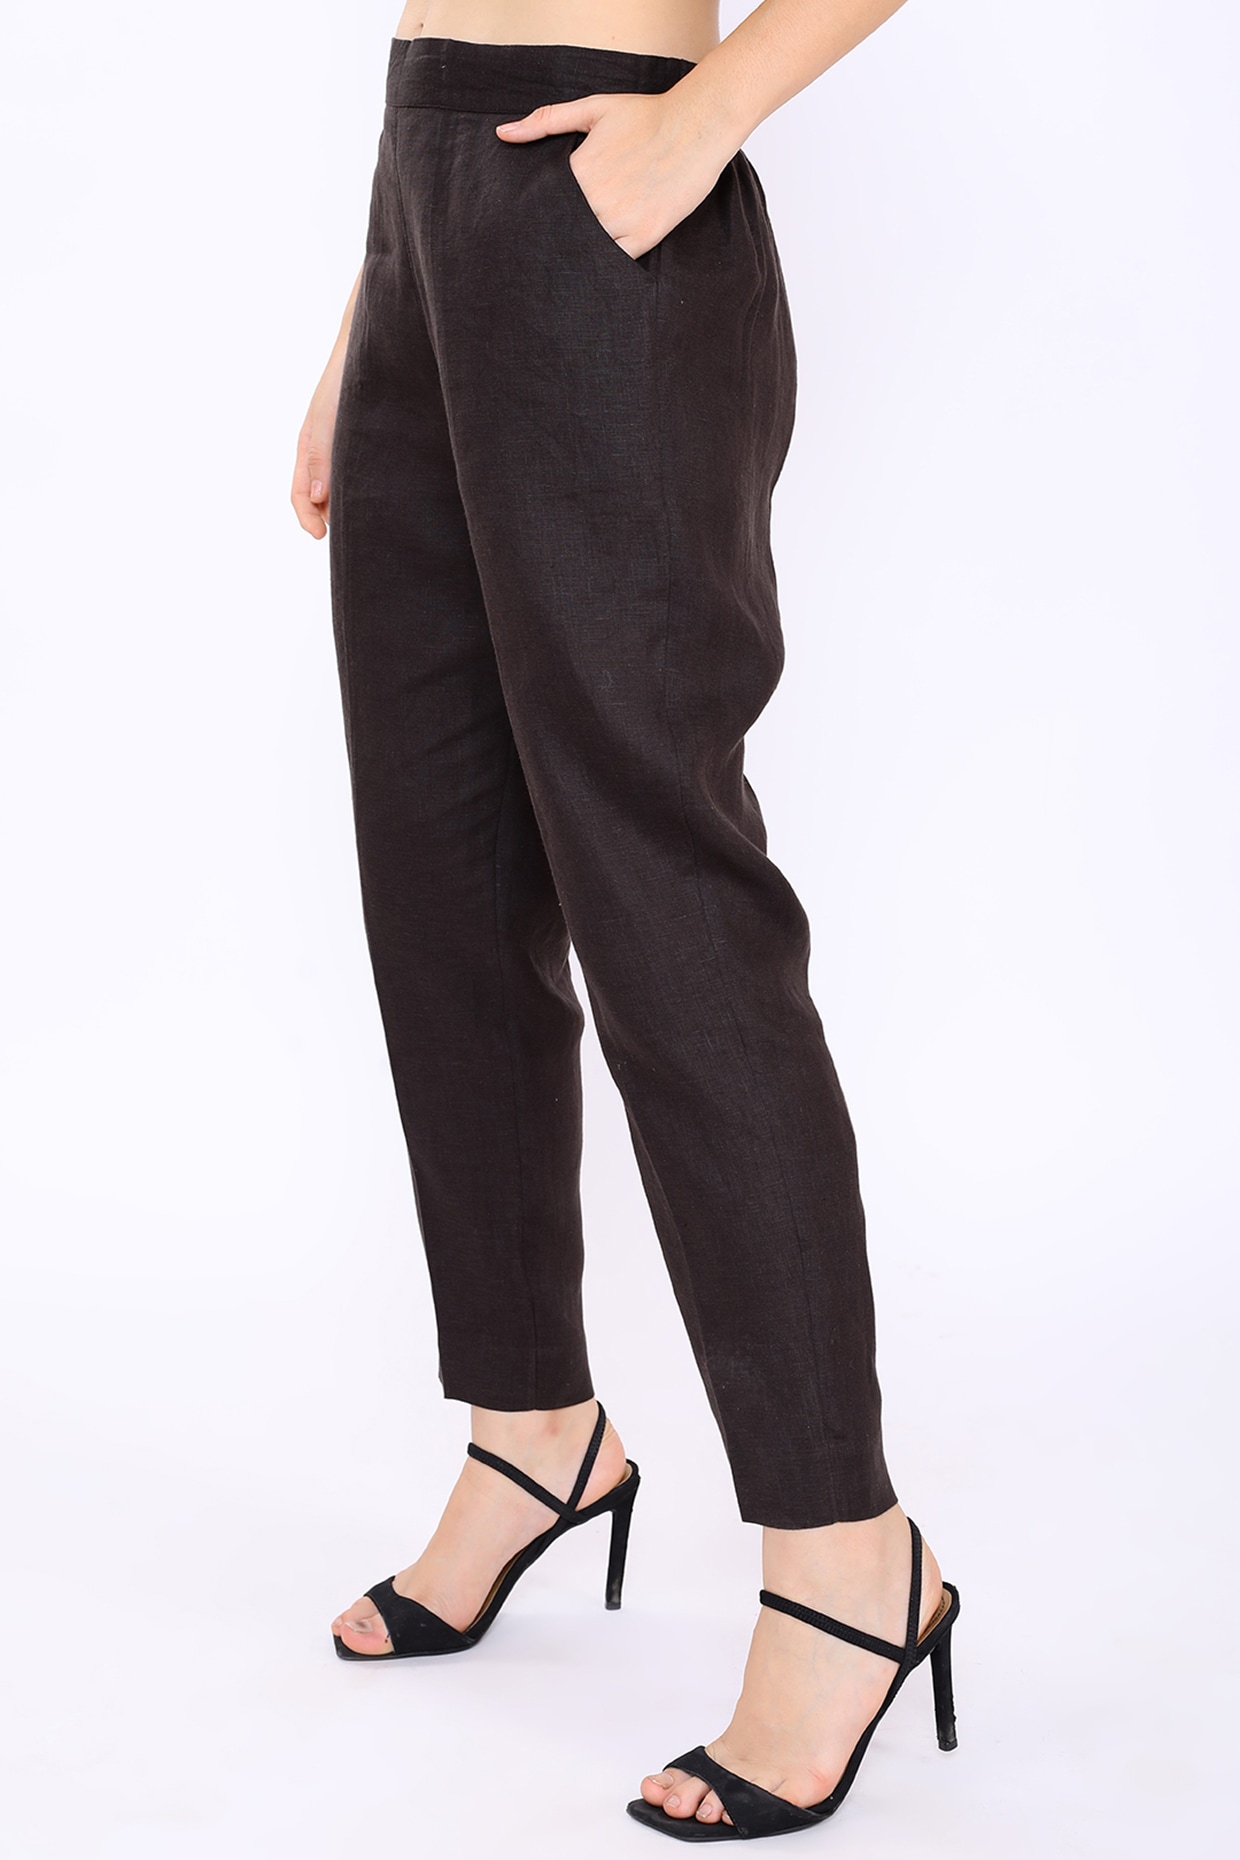 Buy Pencil Cut Pants for Women Online from India's Luxury